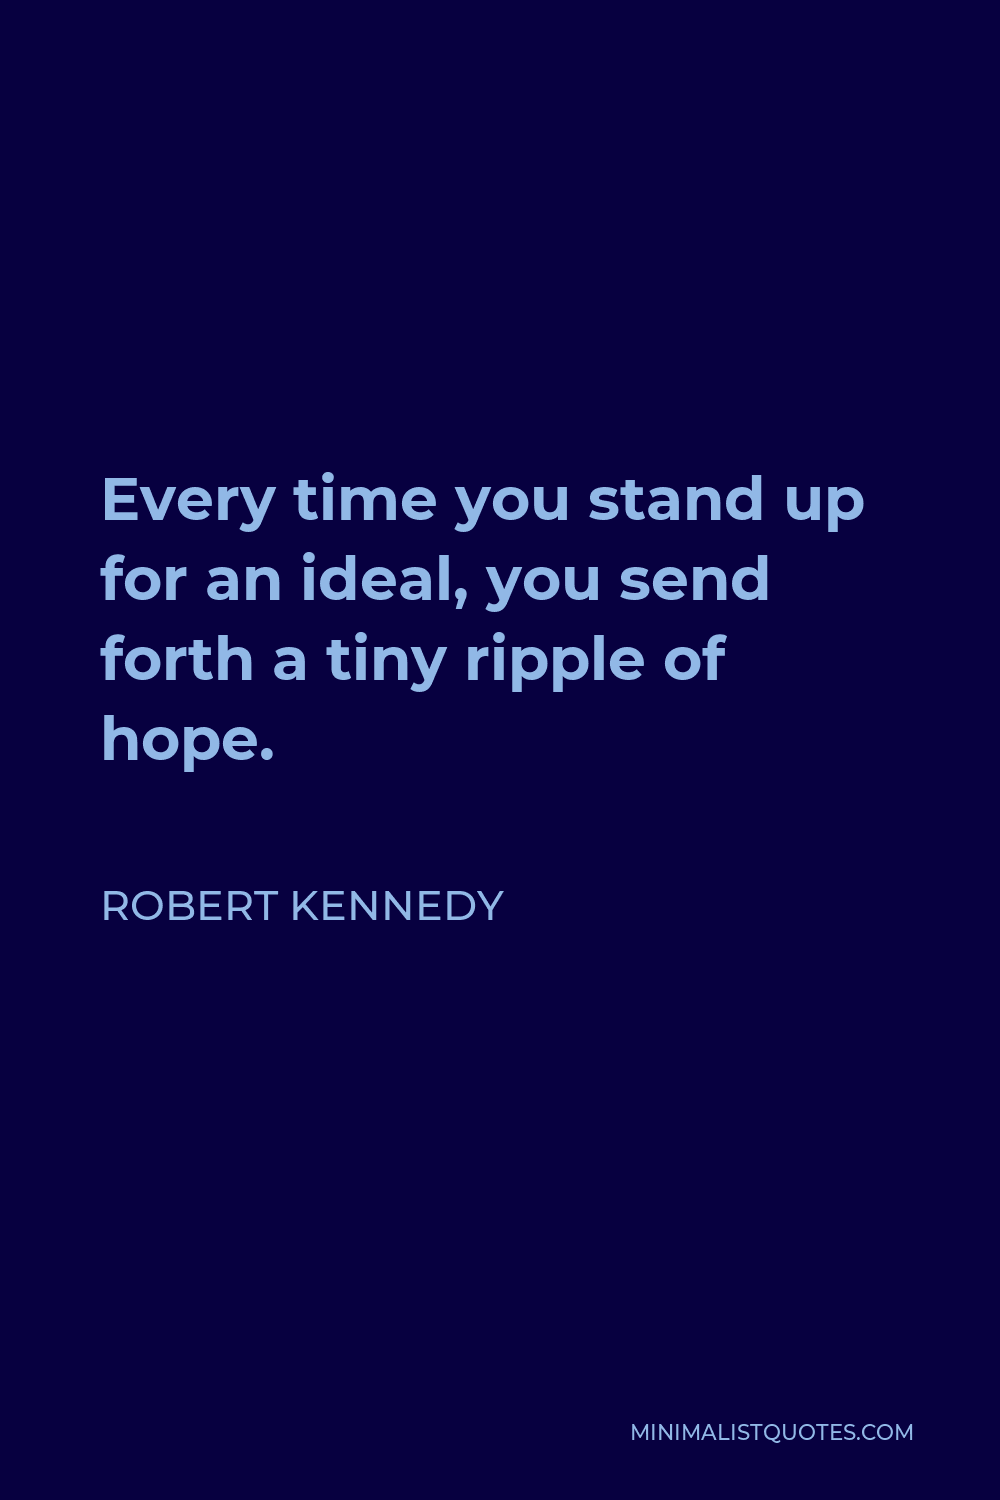 Robert Kennedy Quote - Every time you stand up for an ideal, you send forth a tiny ripple of hope.